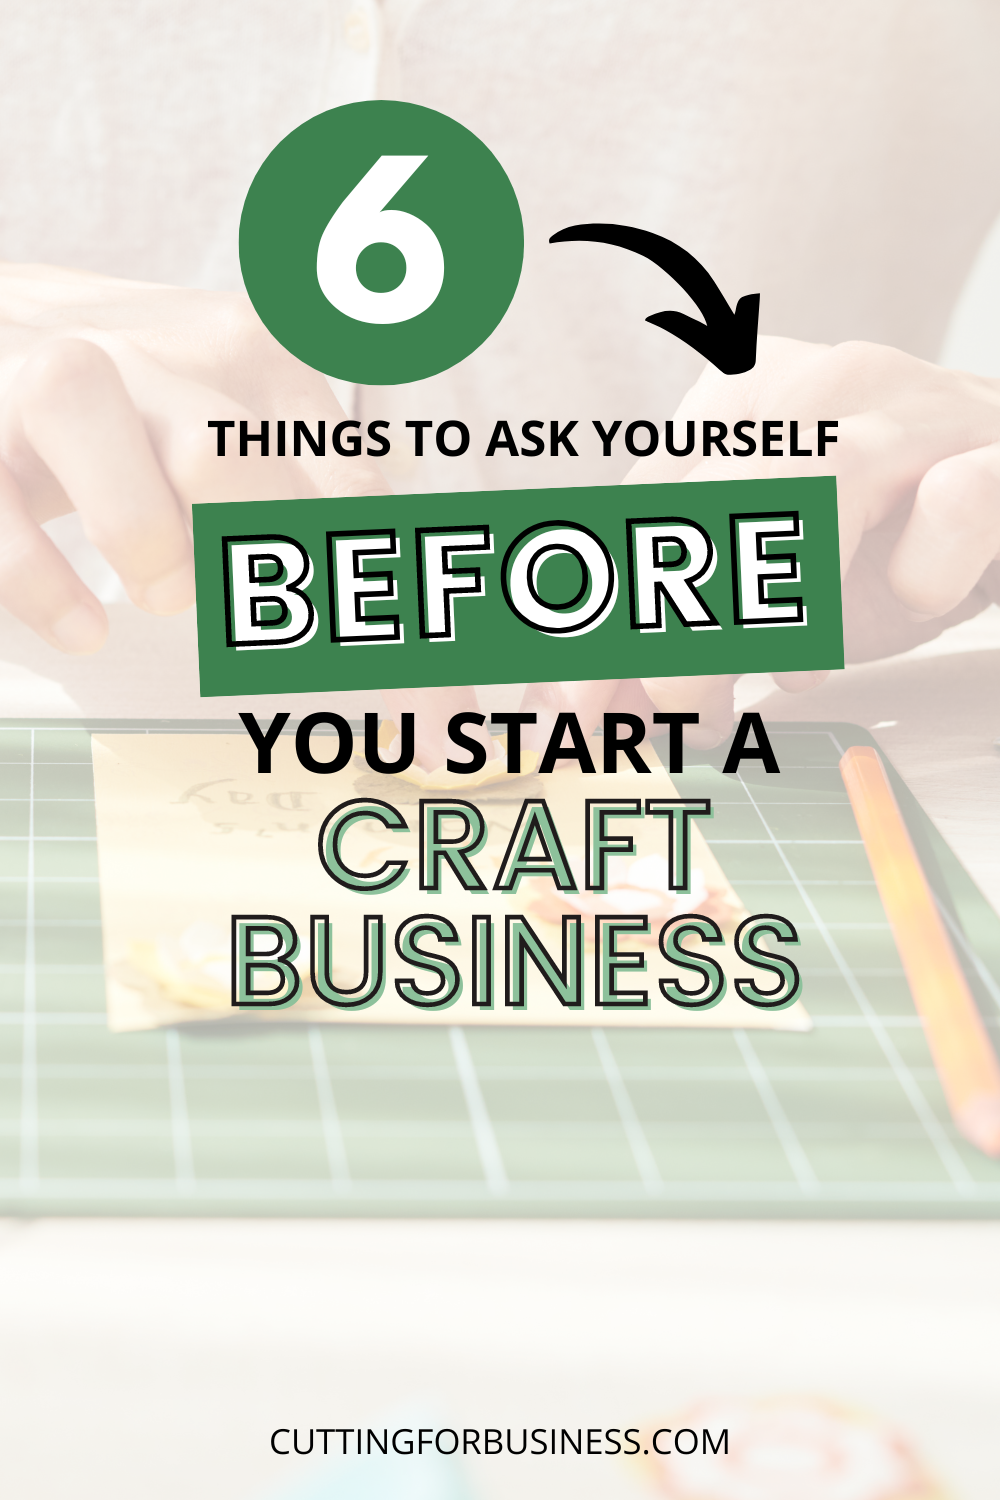 6 Things to Ask Yourself Before You Start a Craft Business - by cuttingforbusiness.com.